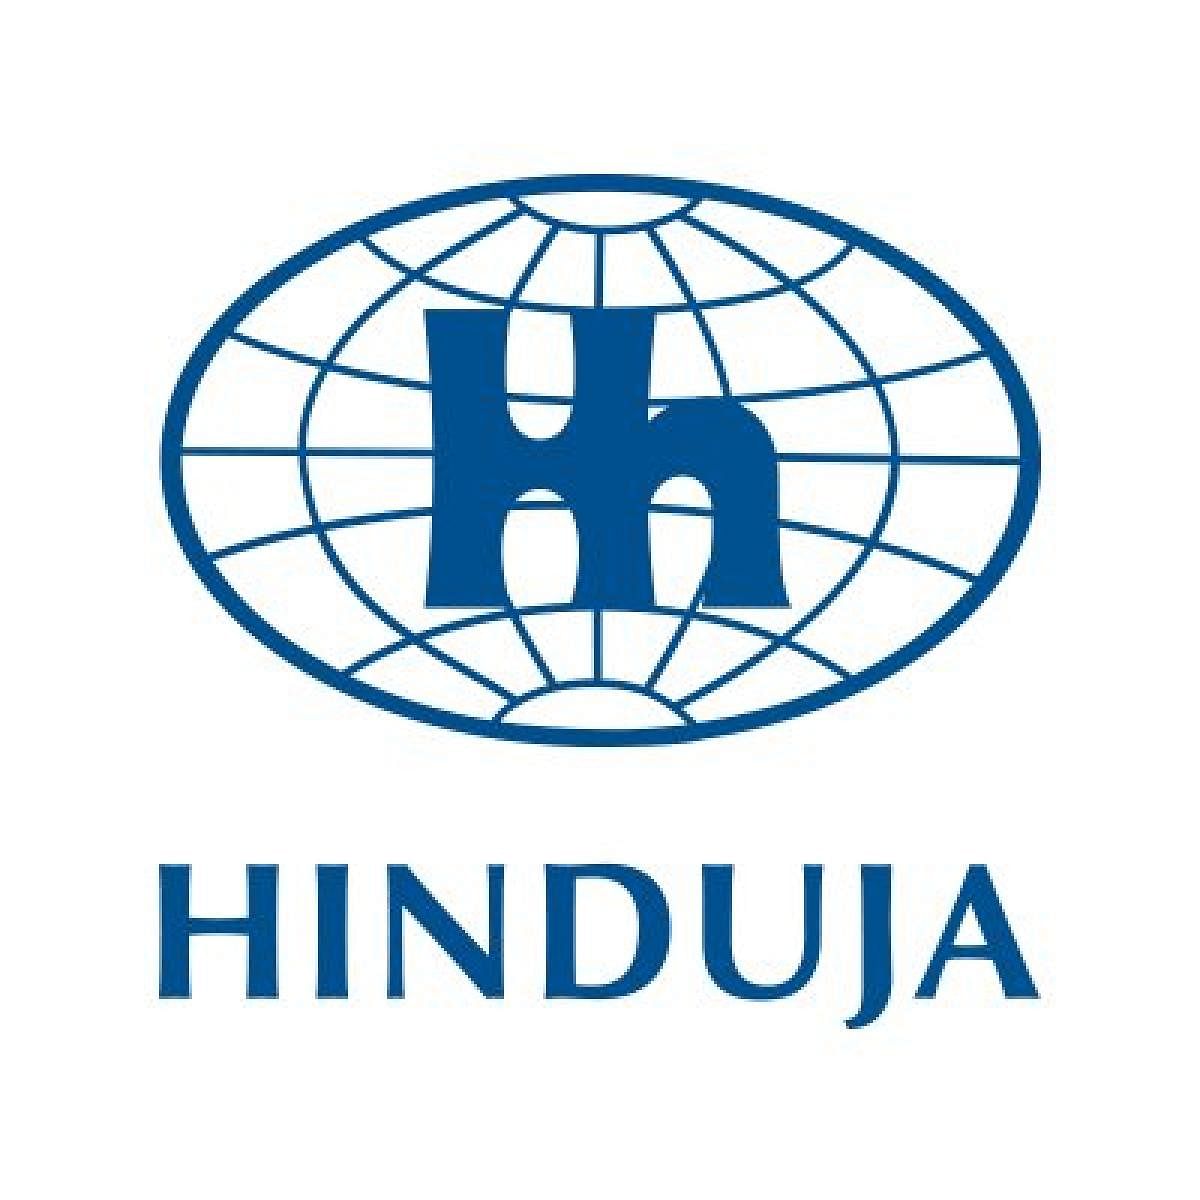 London-based Sri and Gopi Hinduja, of the sprawling Hinduja Group of companies, have a fortune worth £22.0 billion, up by £1.4bn from last year.